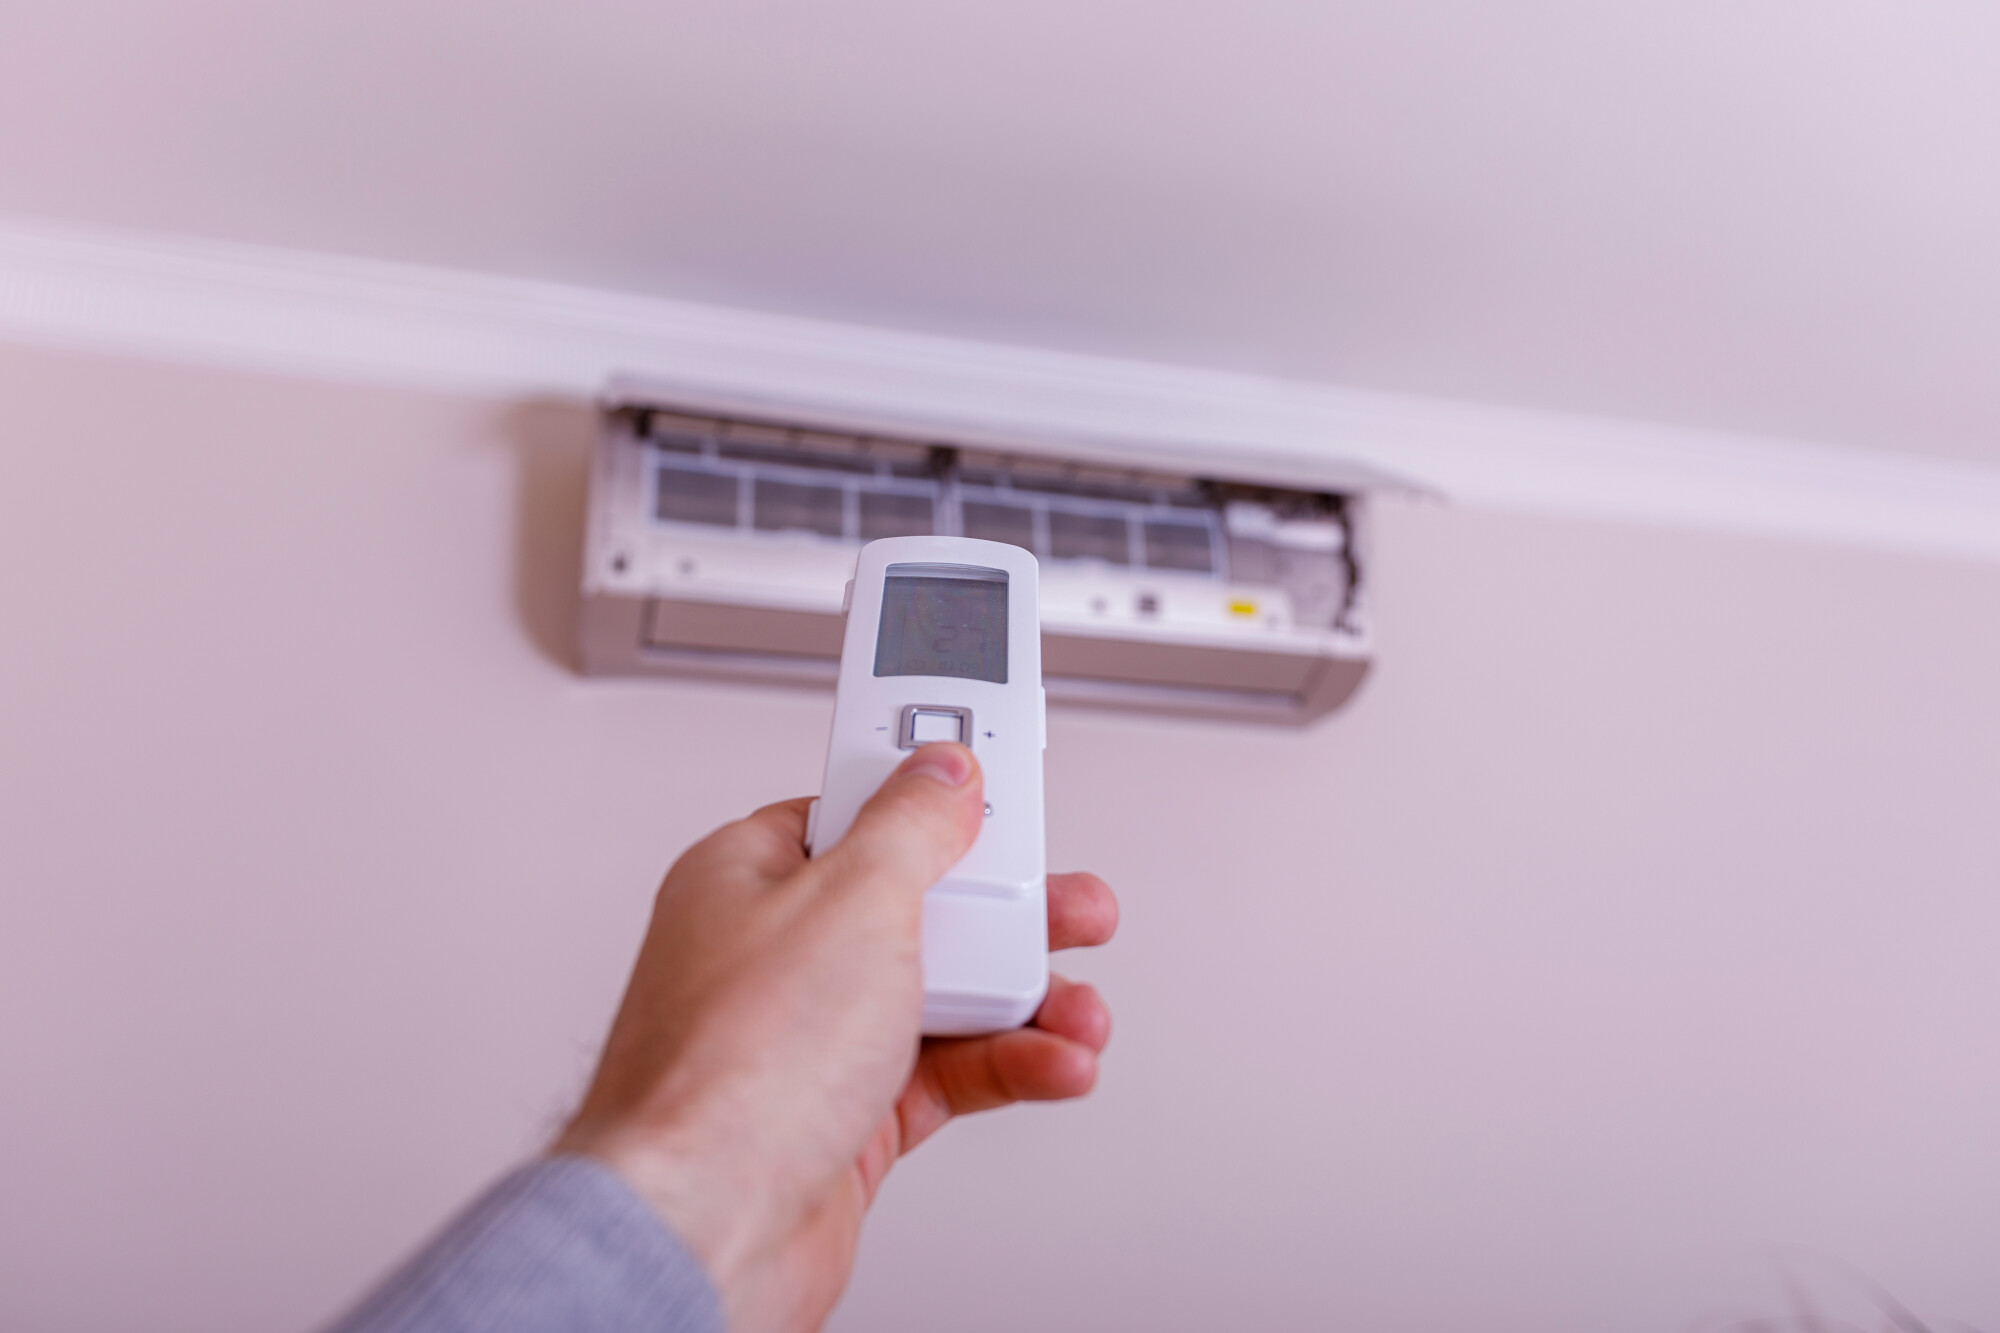 Are you looking for troubleshooting tips for a broken AC unit? If so, check out this guide for everything you should know.